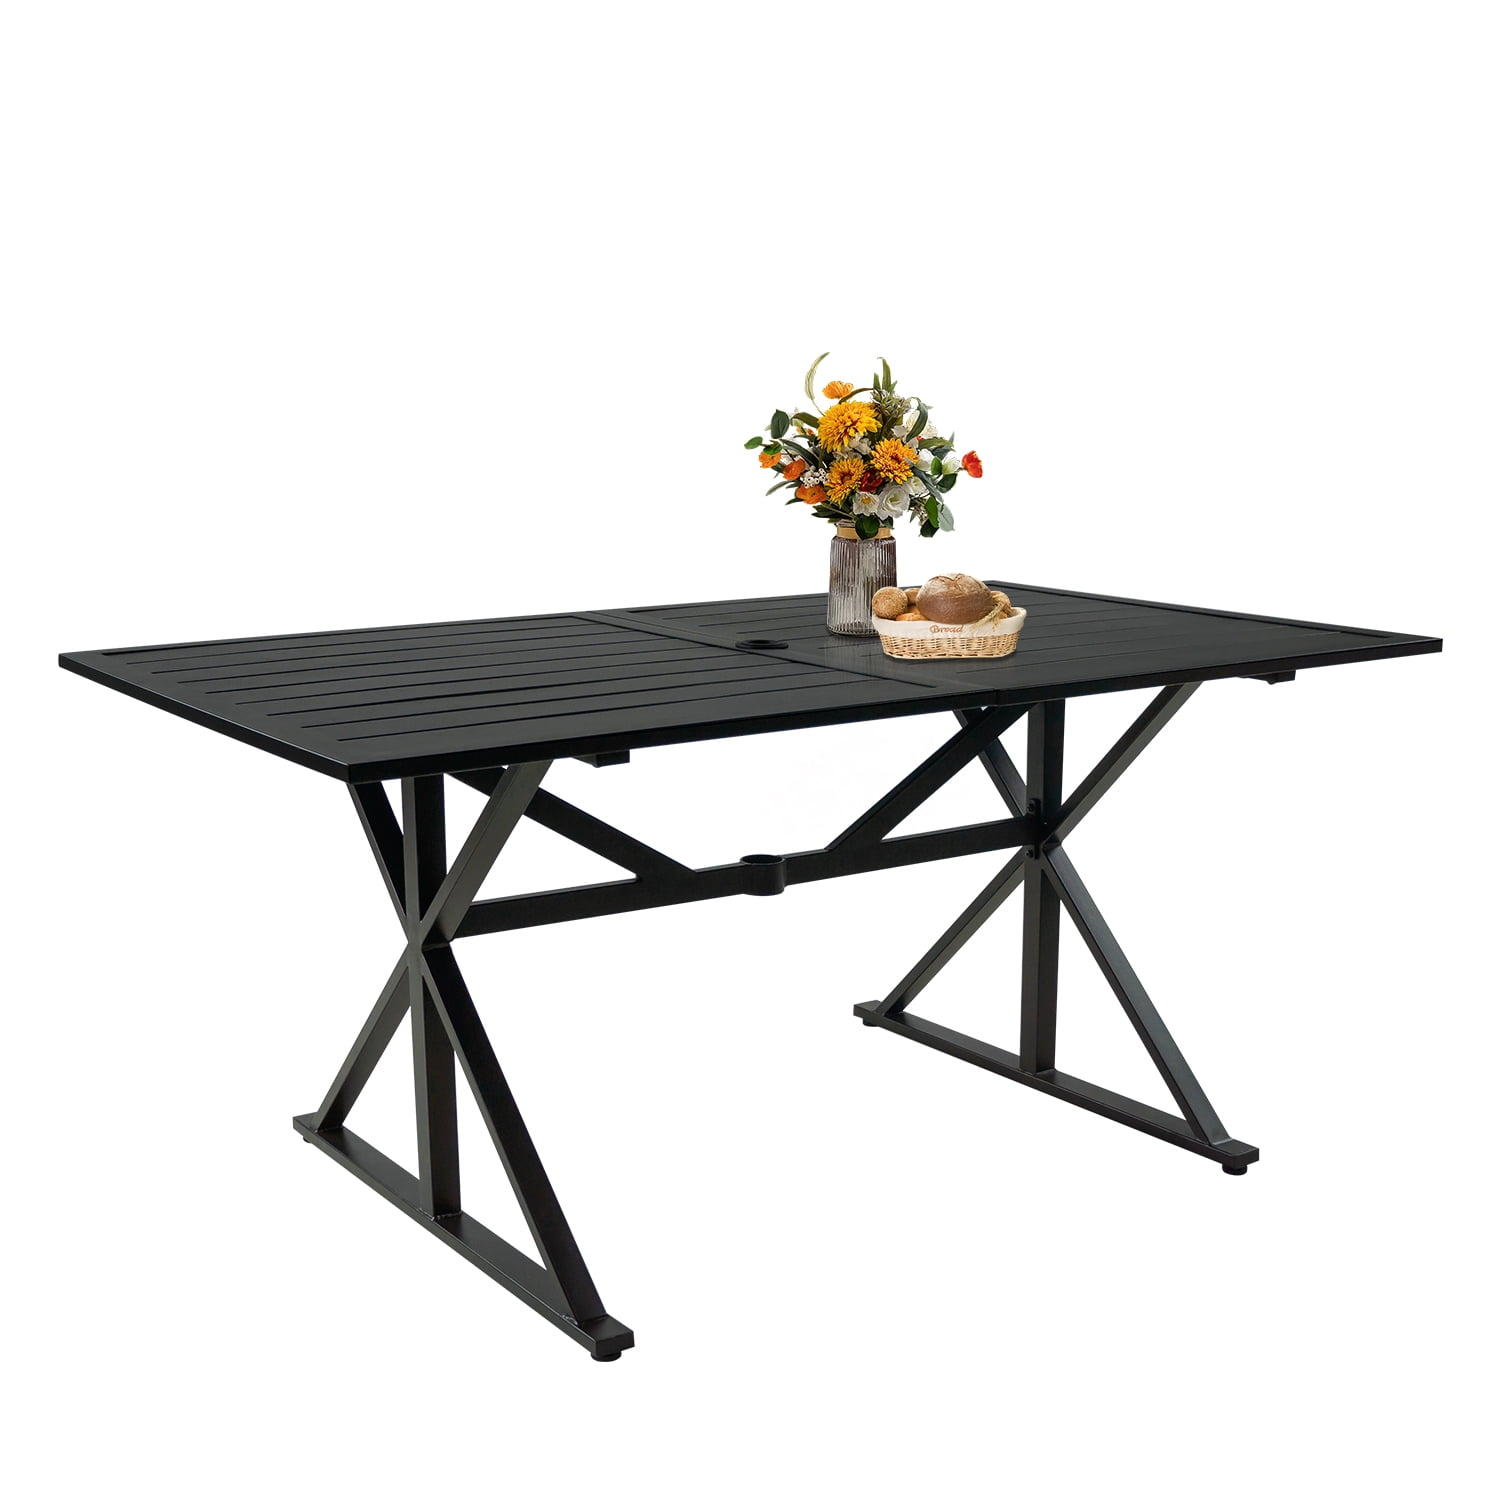 ICE ARMOR 6-Person Patio Dining Table 63